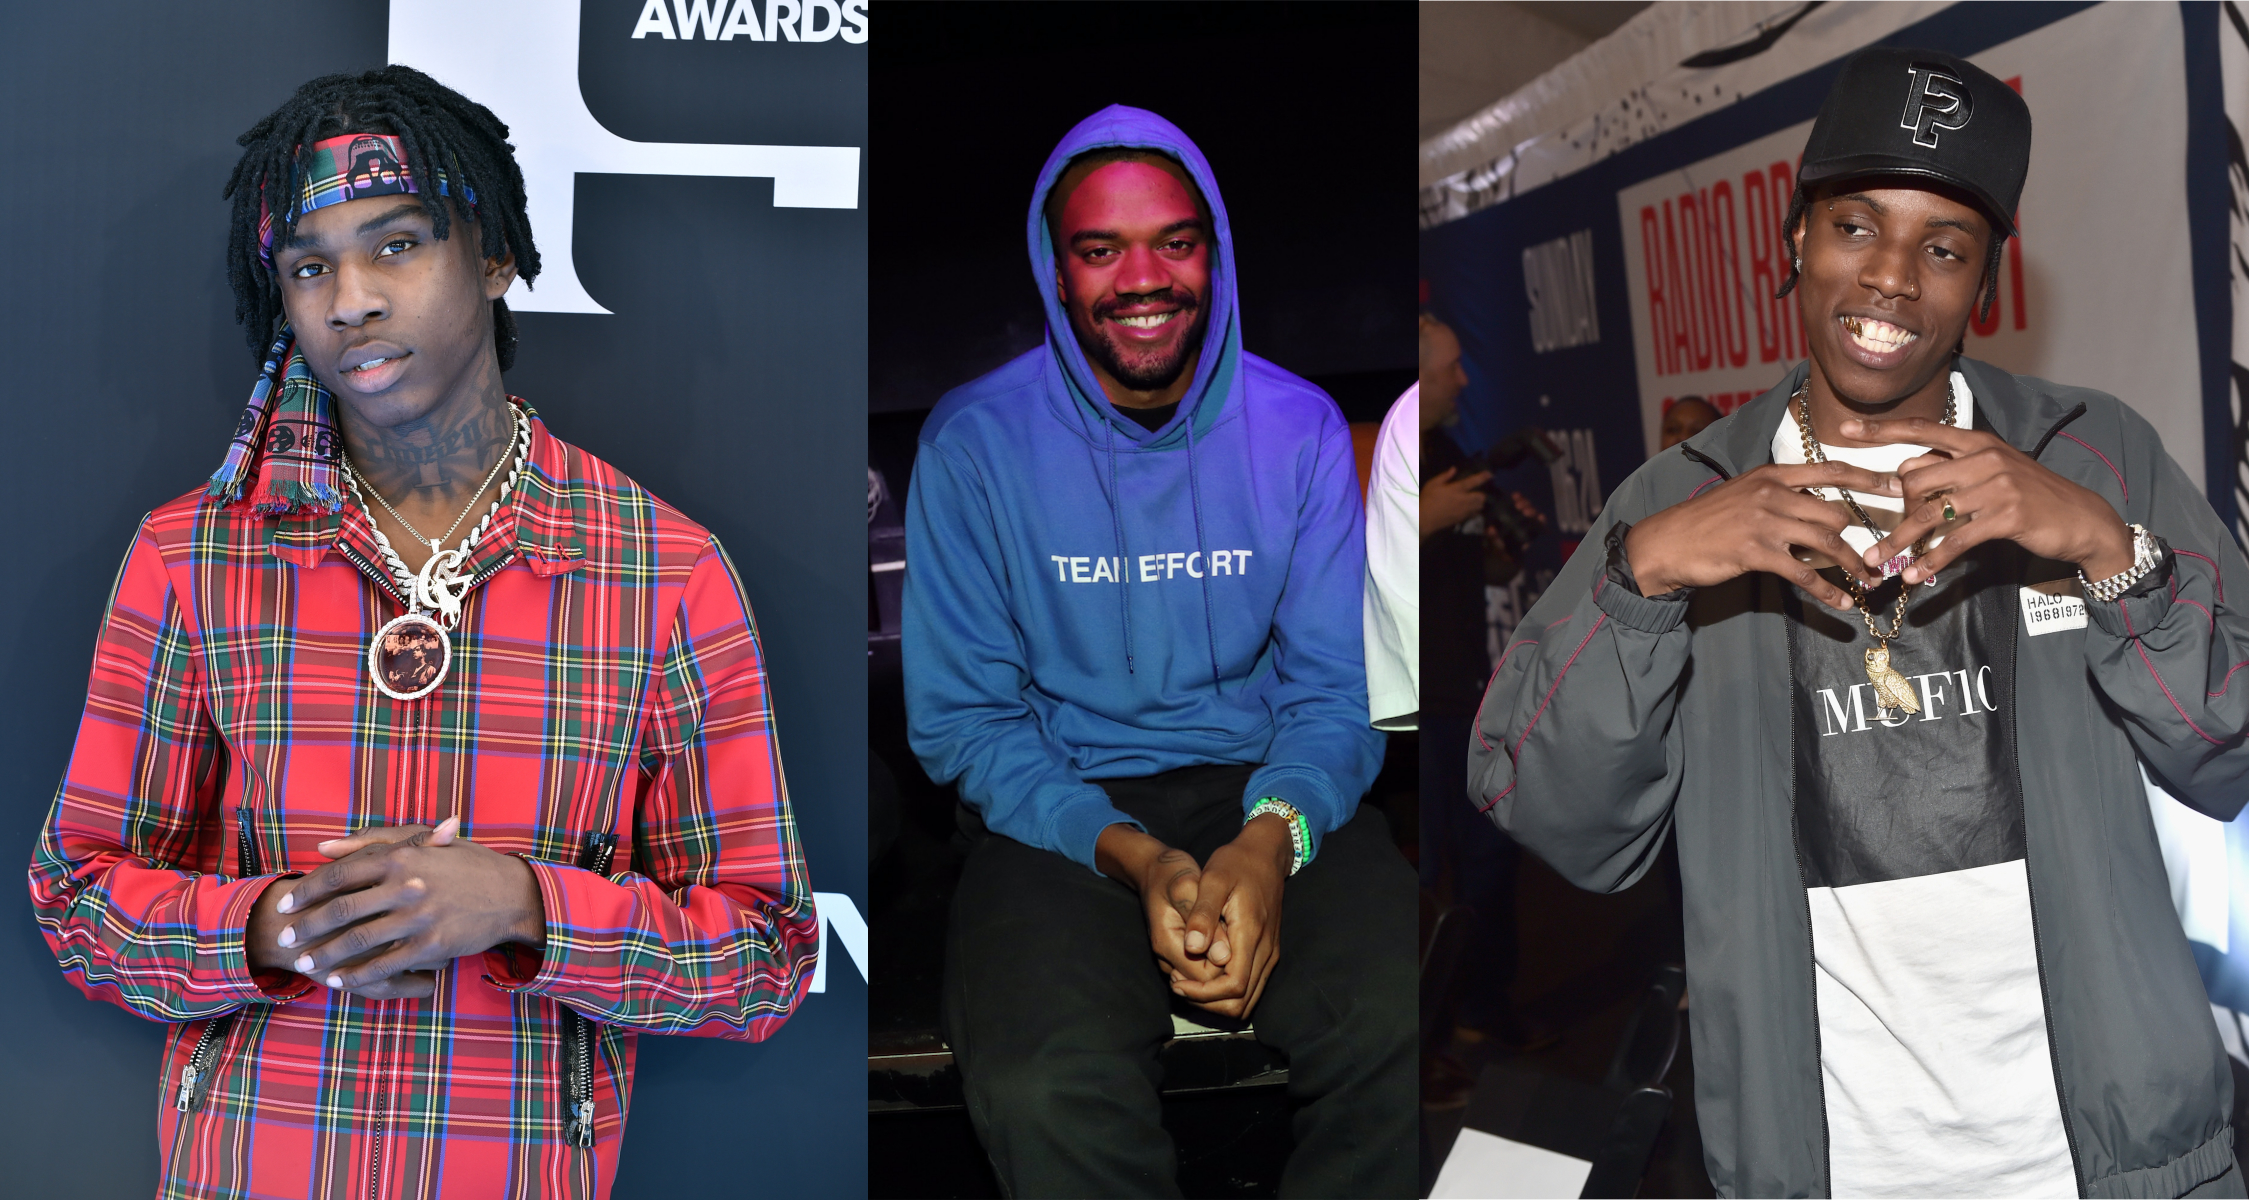 Ameer Vann, Polo G & More Conquer This Week’s “FIRE EMOJI” Playlist